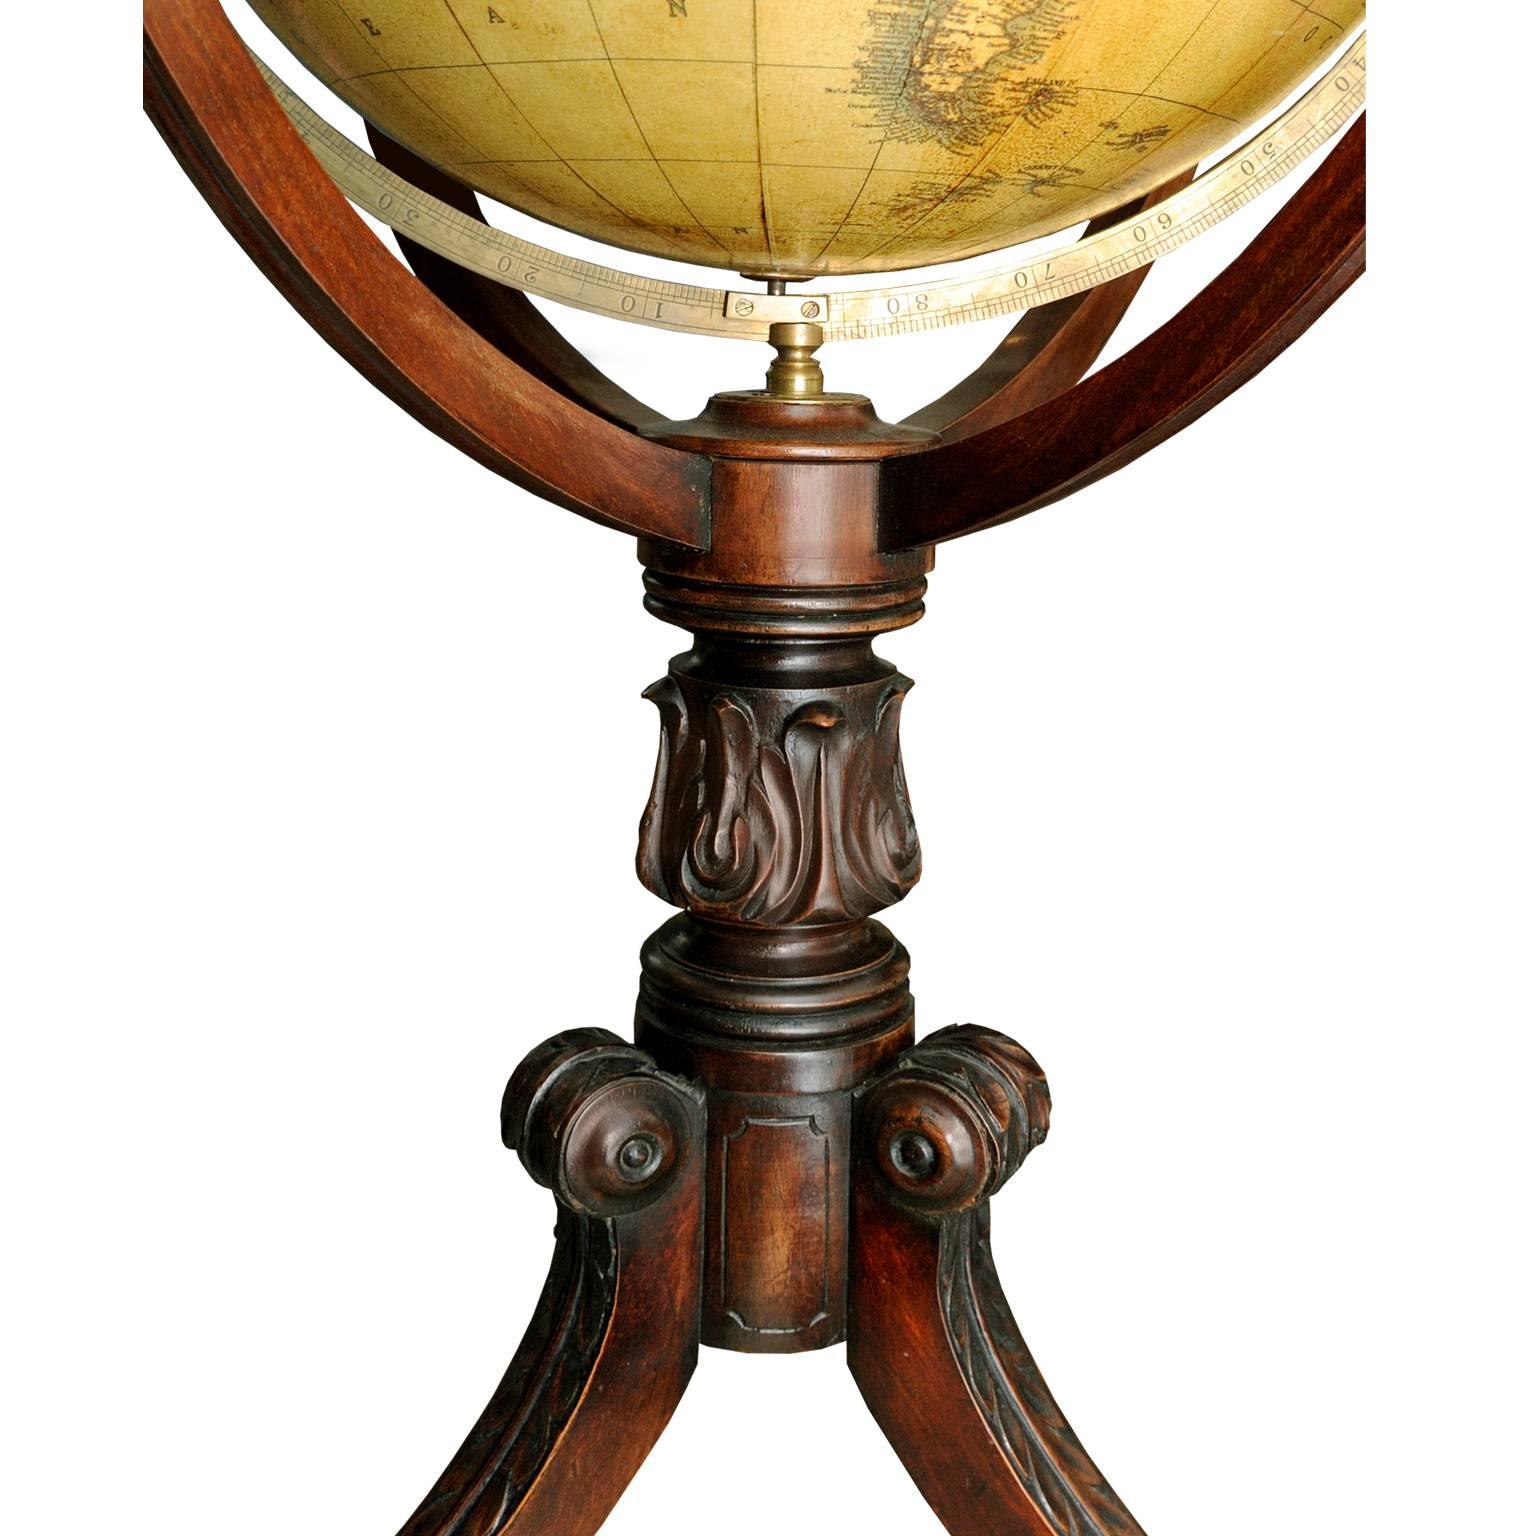 English Pair of early 19th Century Regency Globe Stands, circa 1820 For Sale